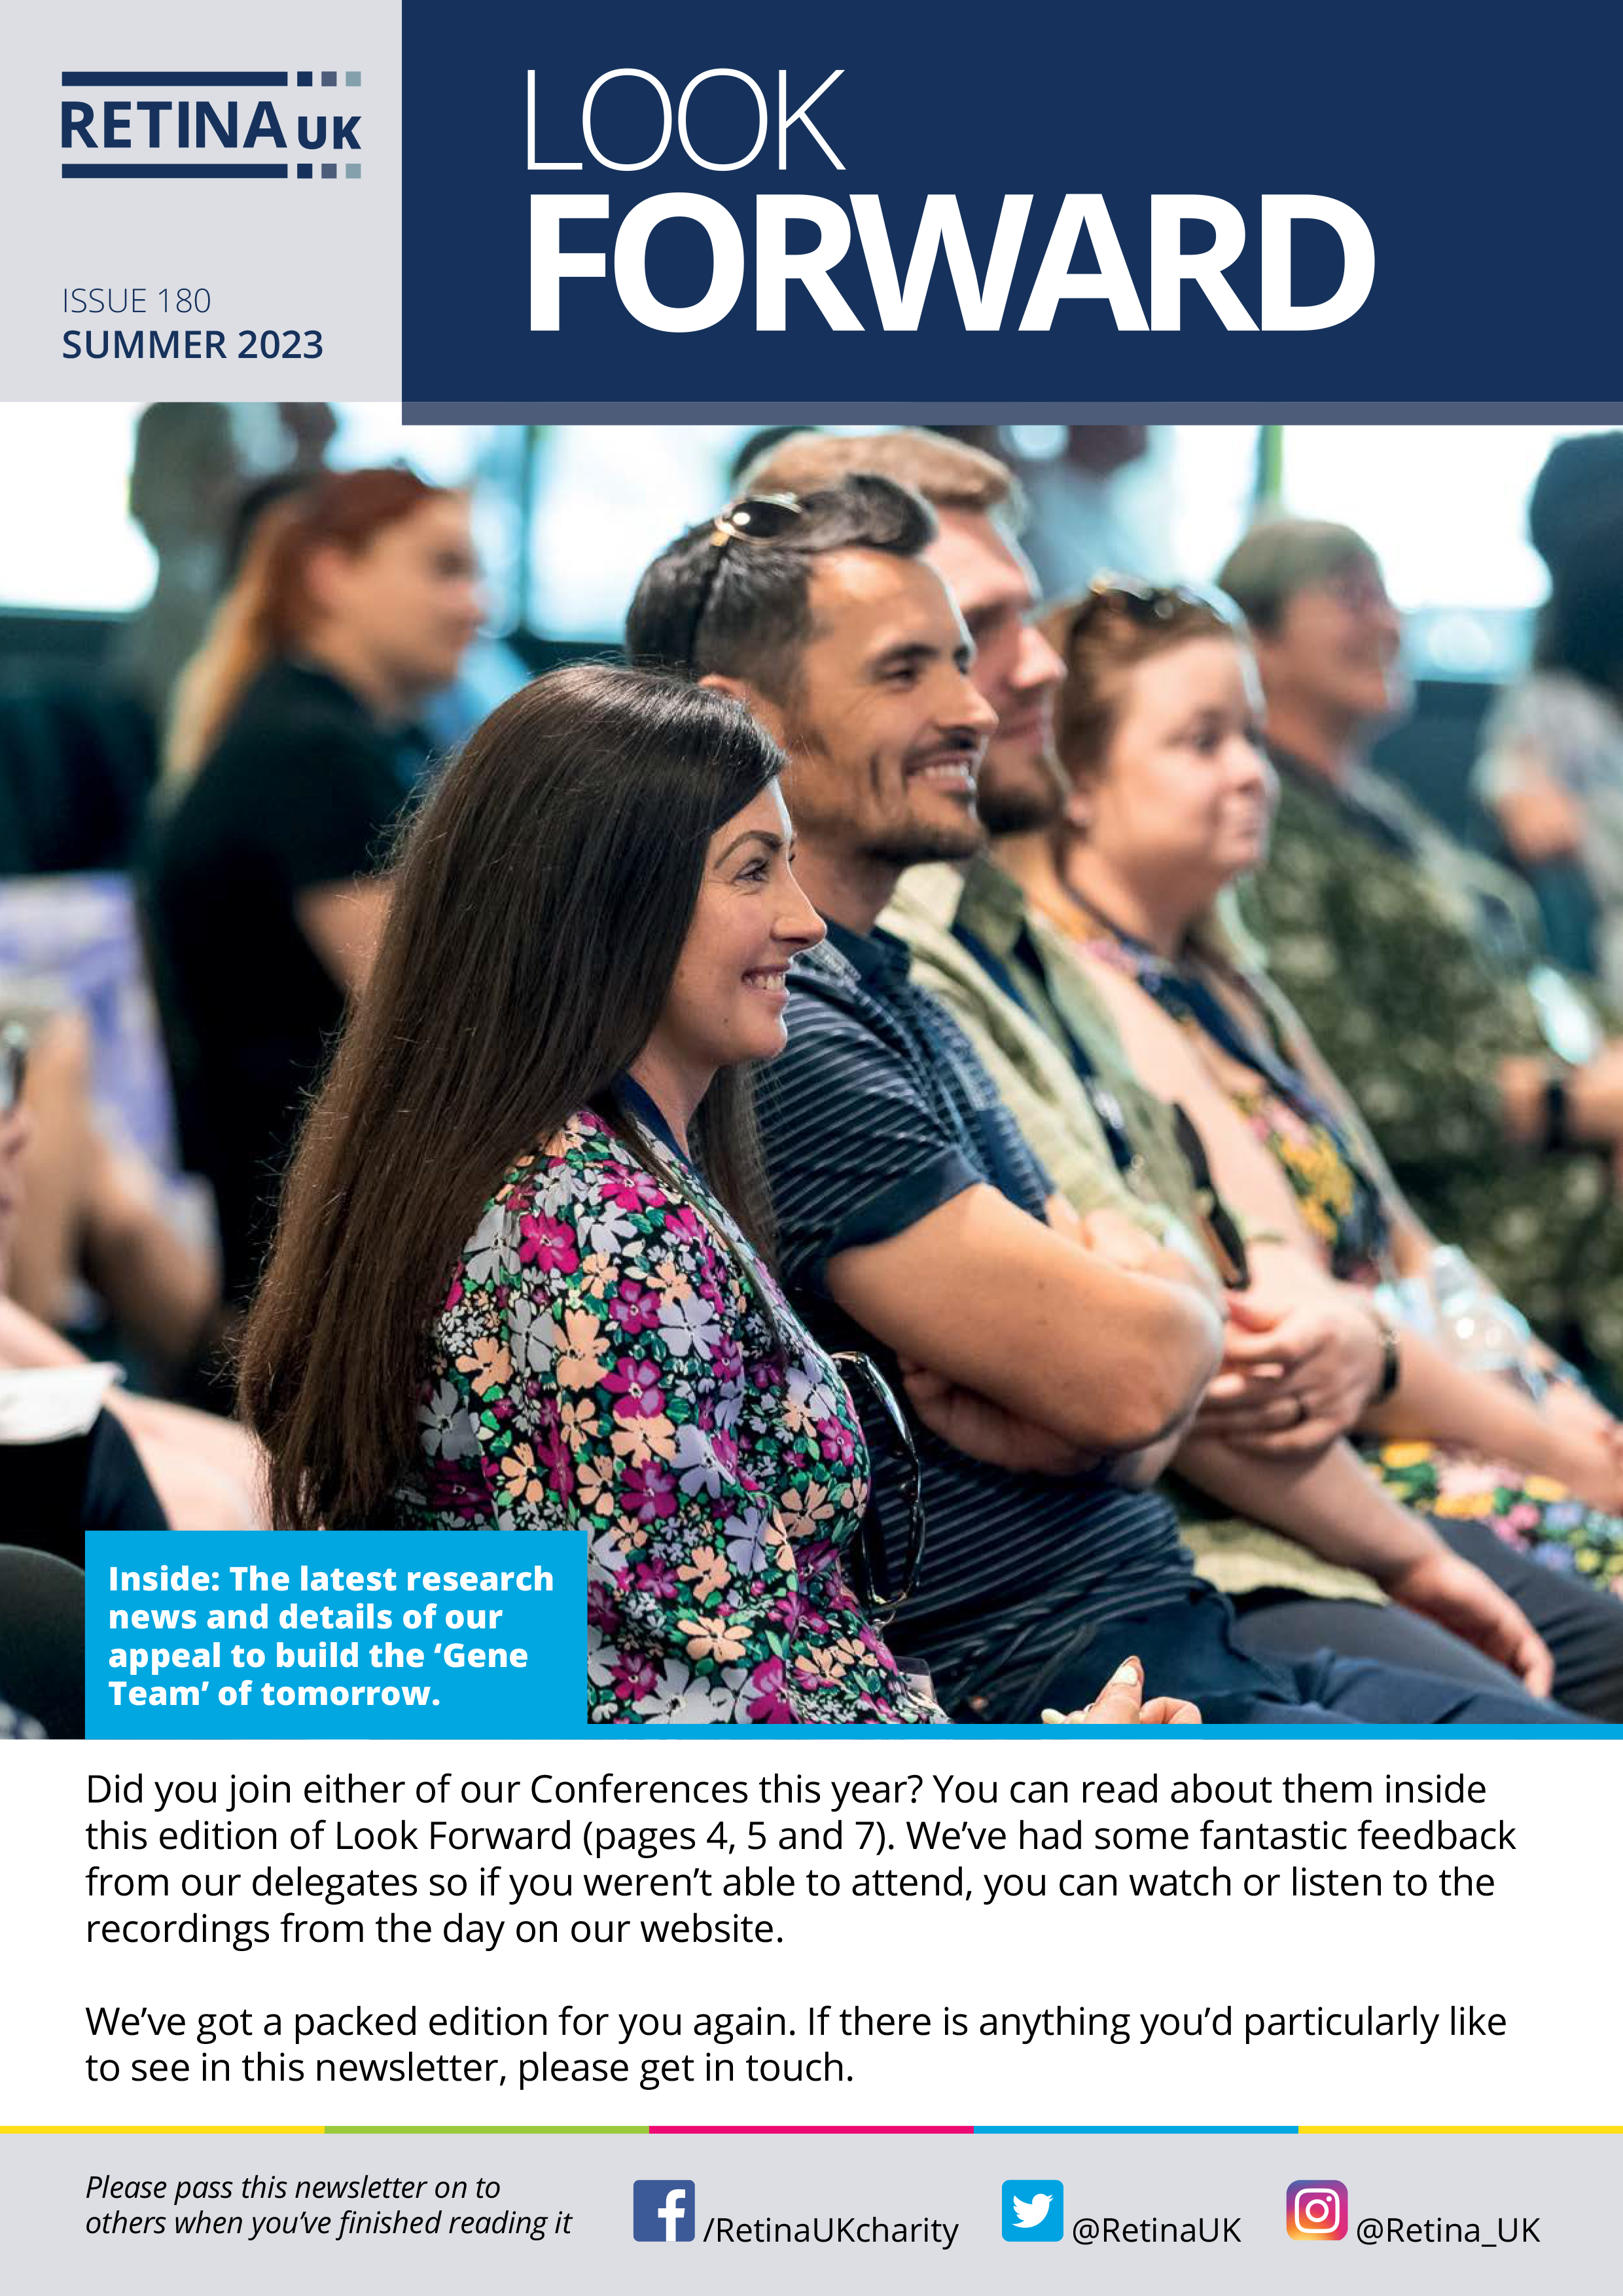 The Spring 2023 edition of the Retina UK newsletter, Look Forward, which includes articles about our upcoming events, research updates and more.